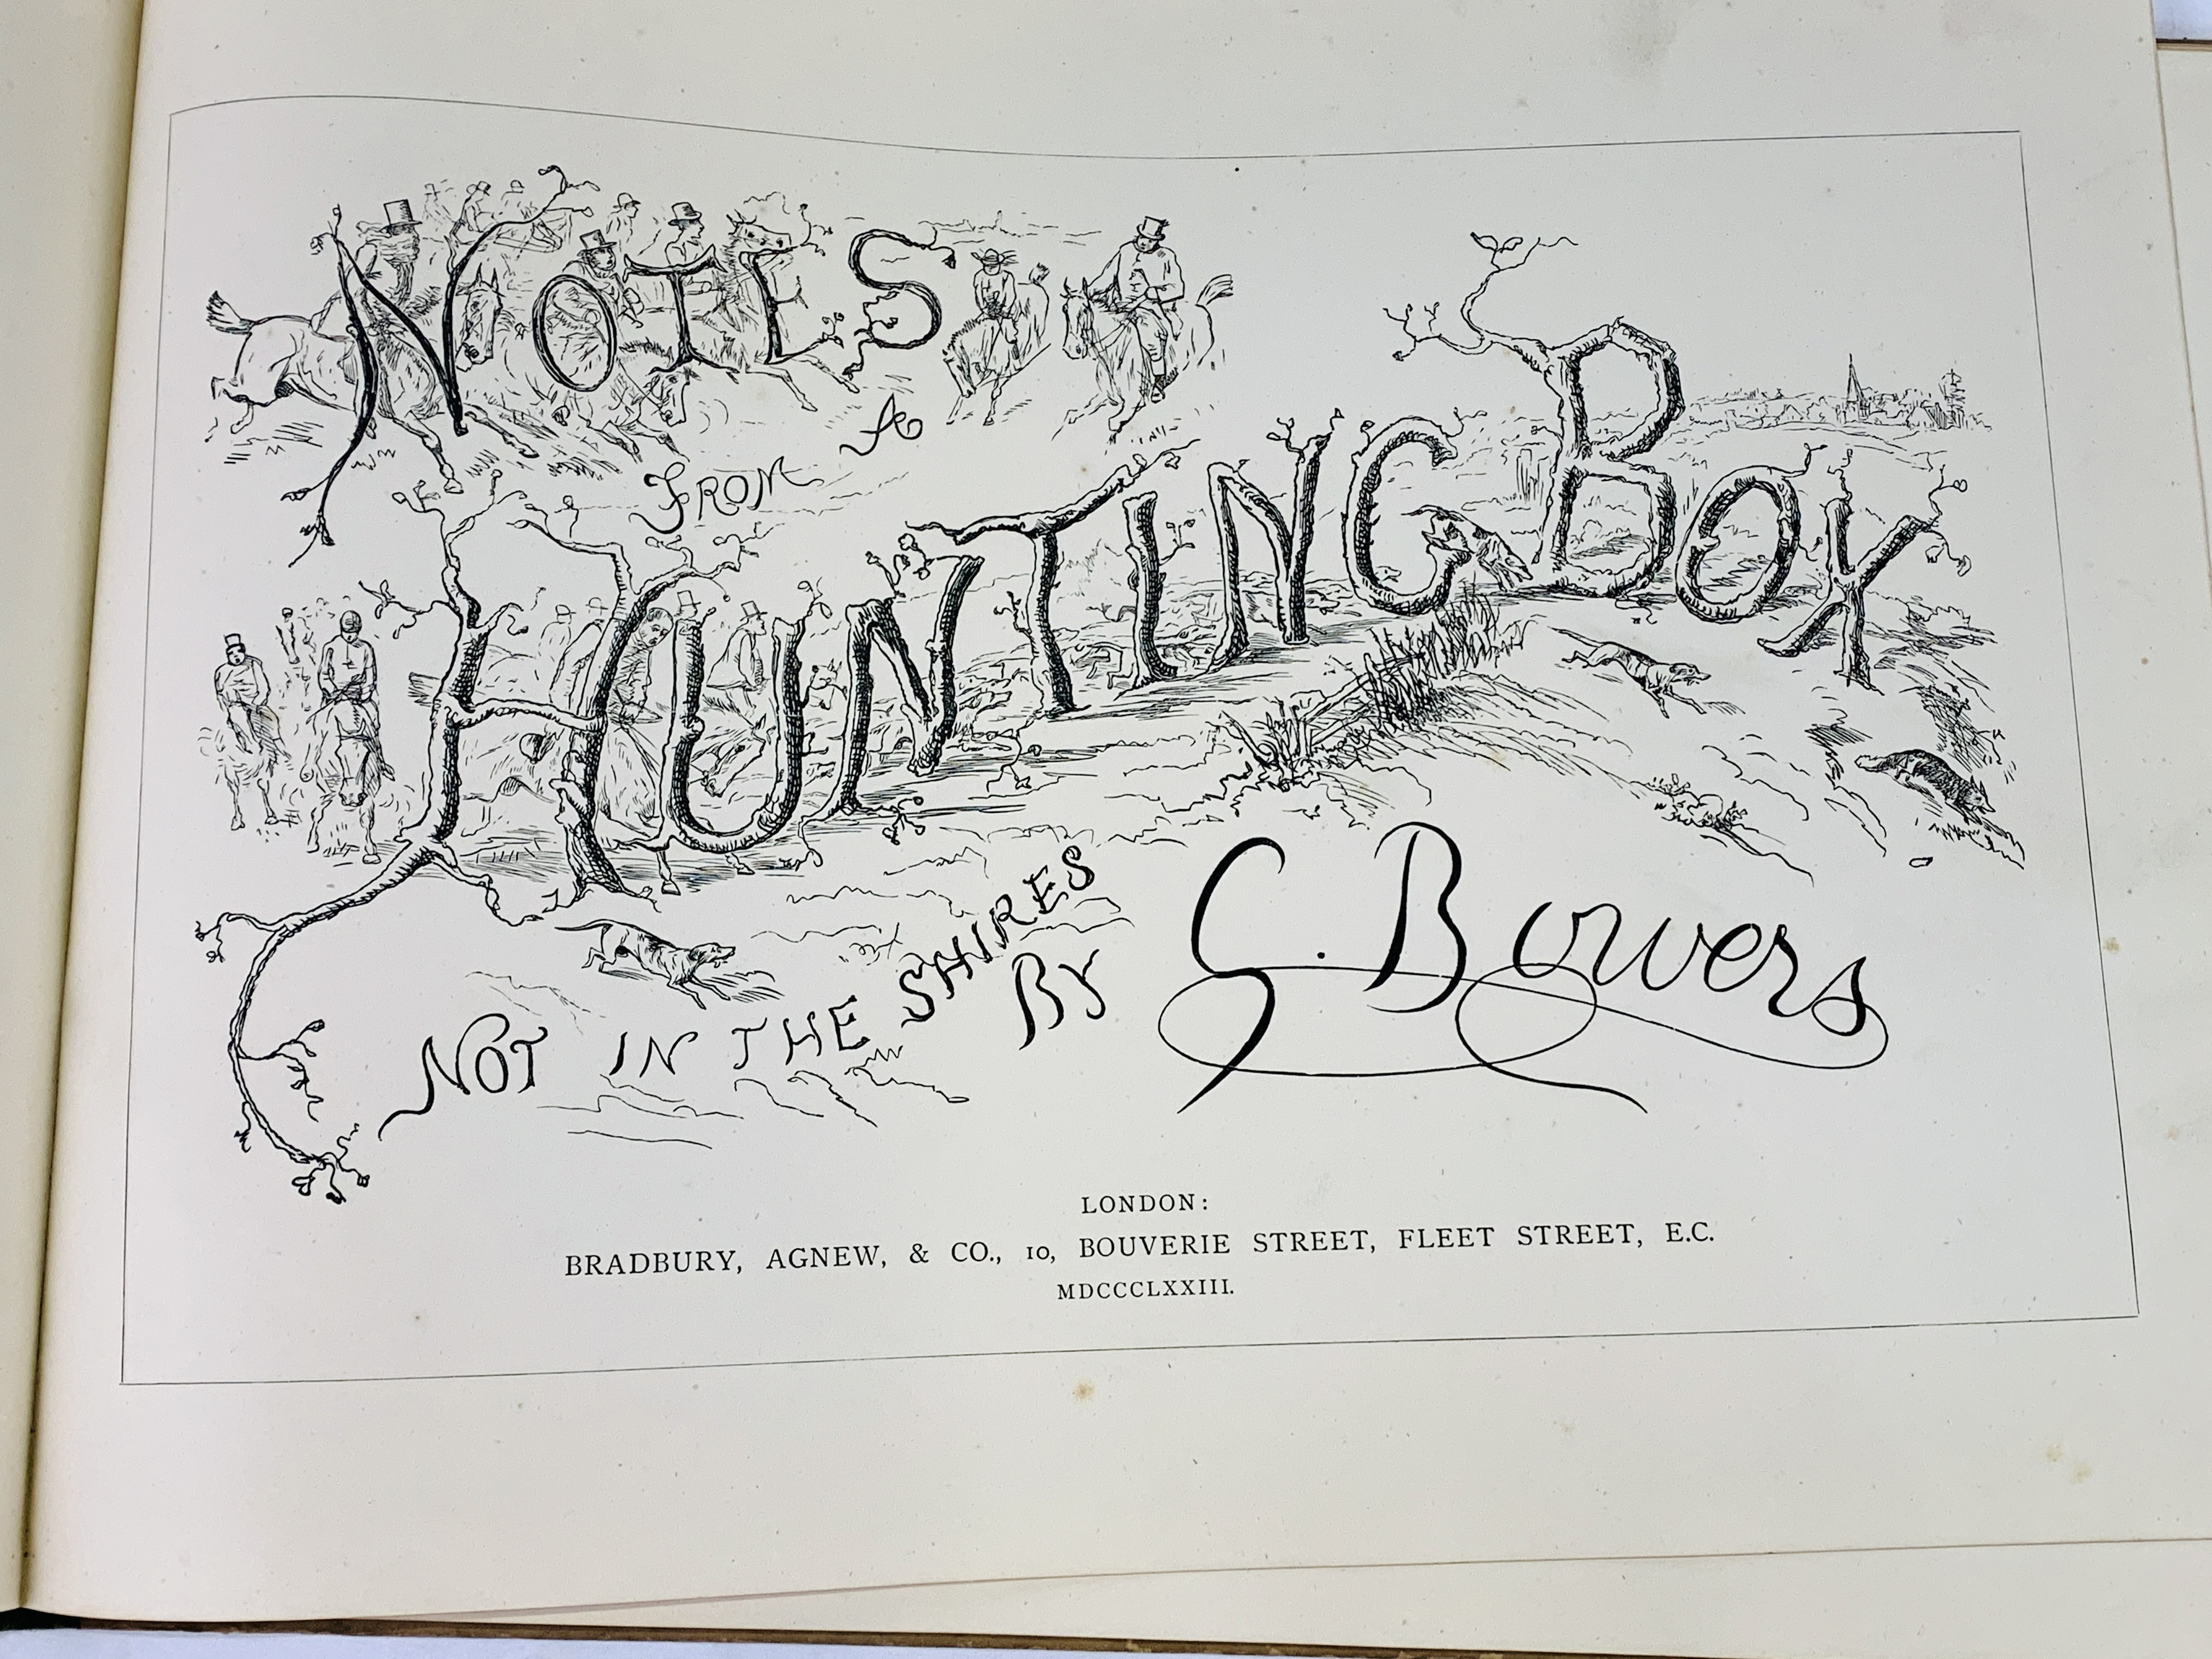 "Notes from a Hunting Box (not) In the Shires", by G Bowers - Image 4 of 6